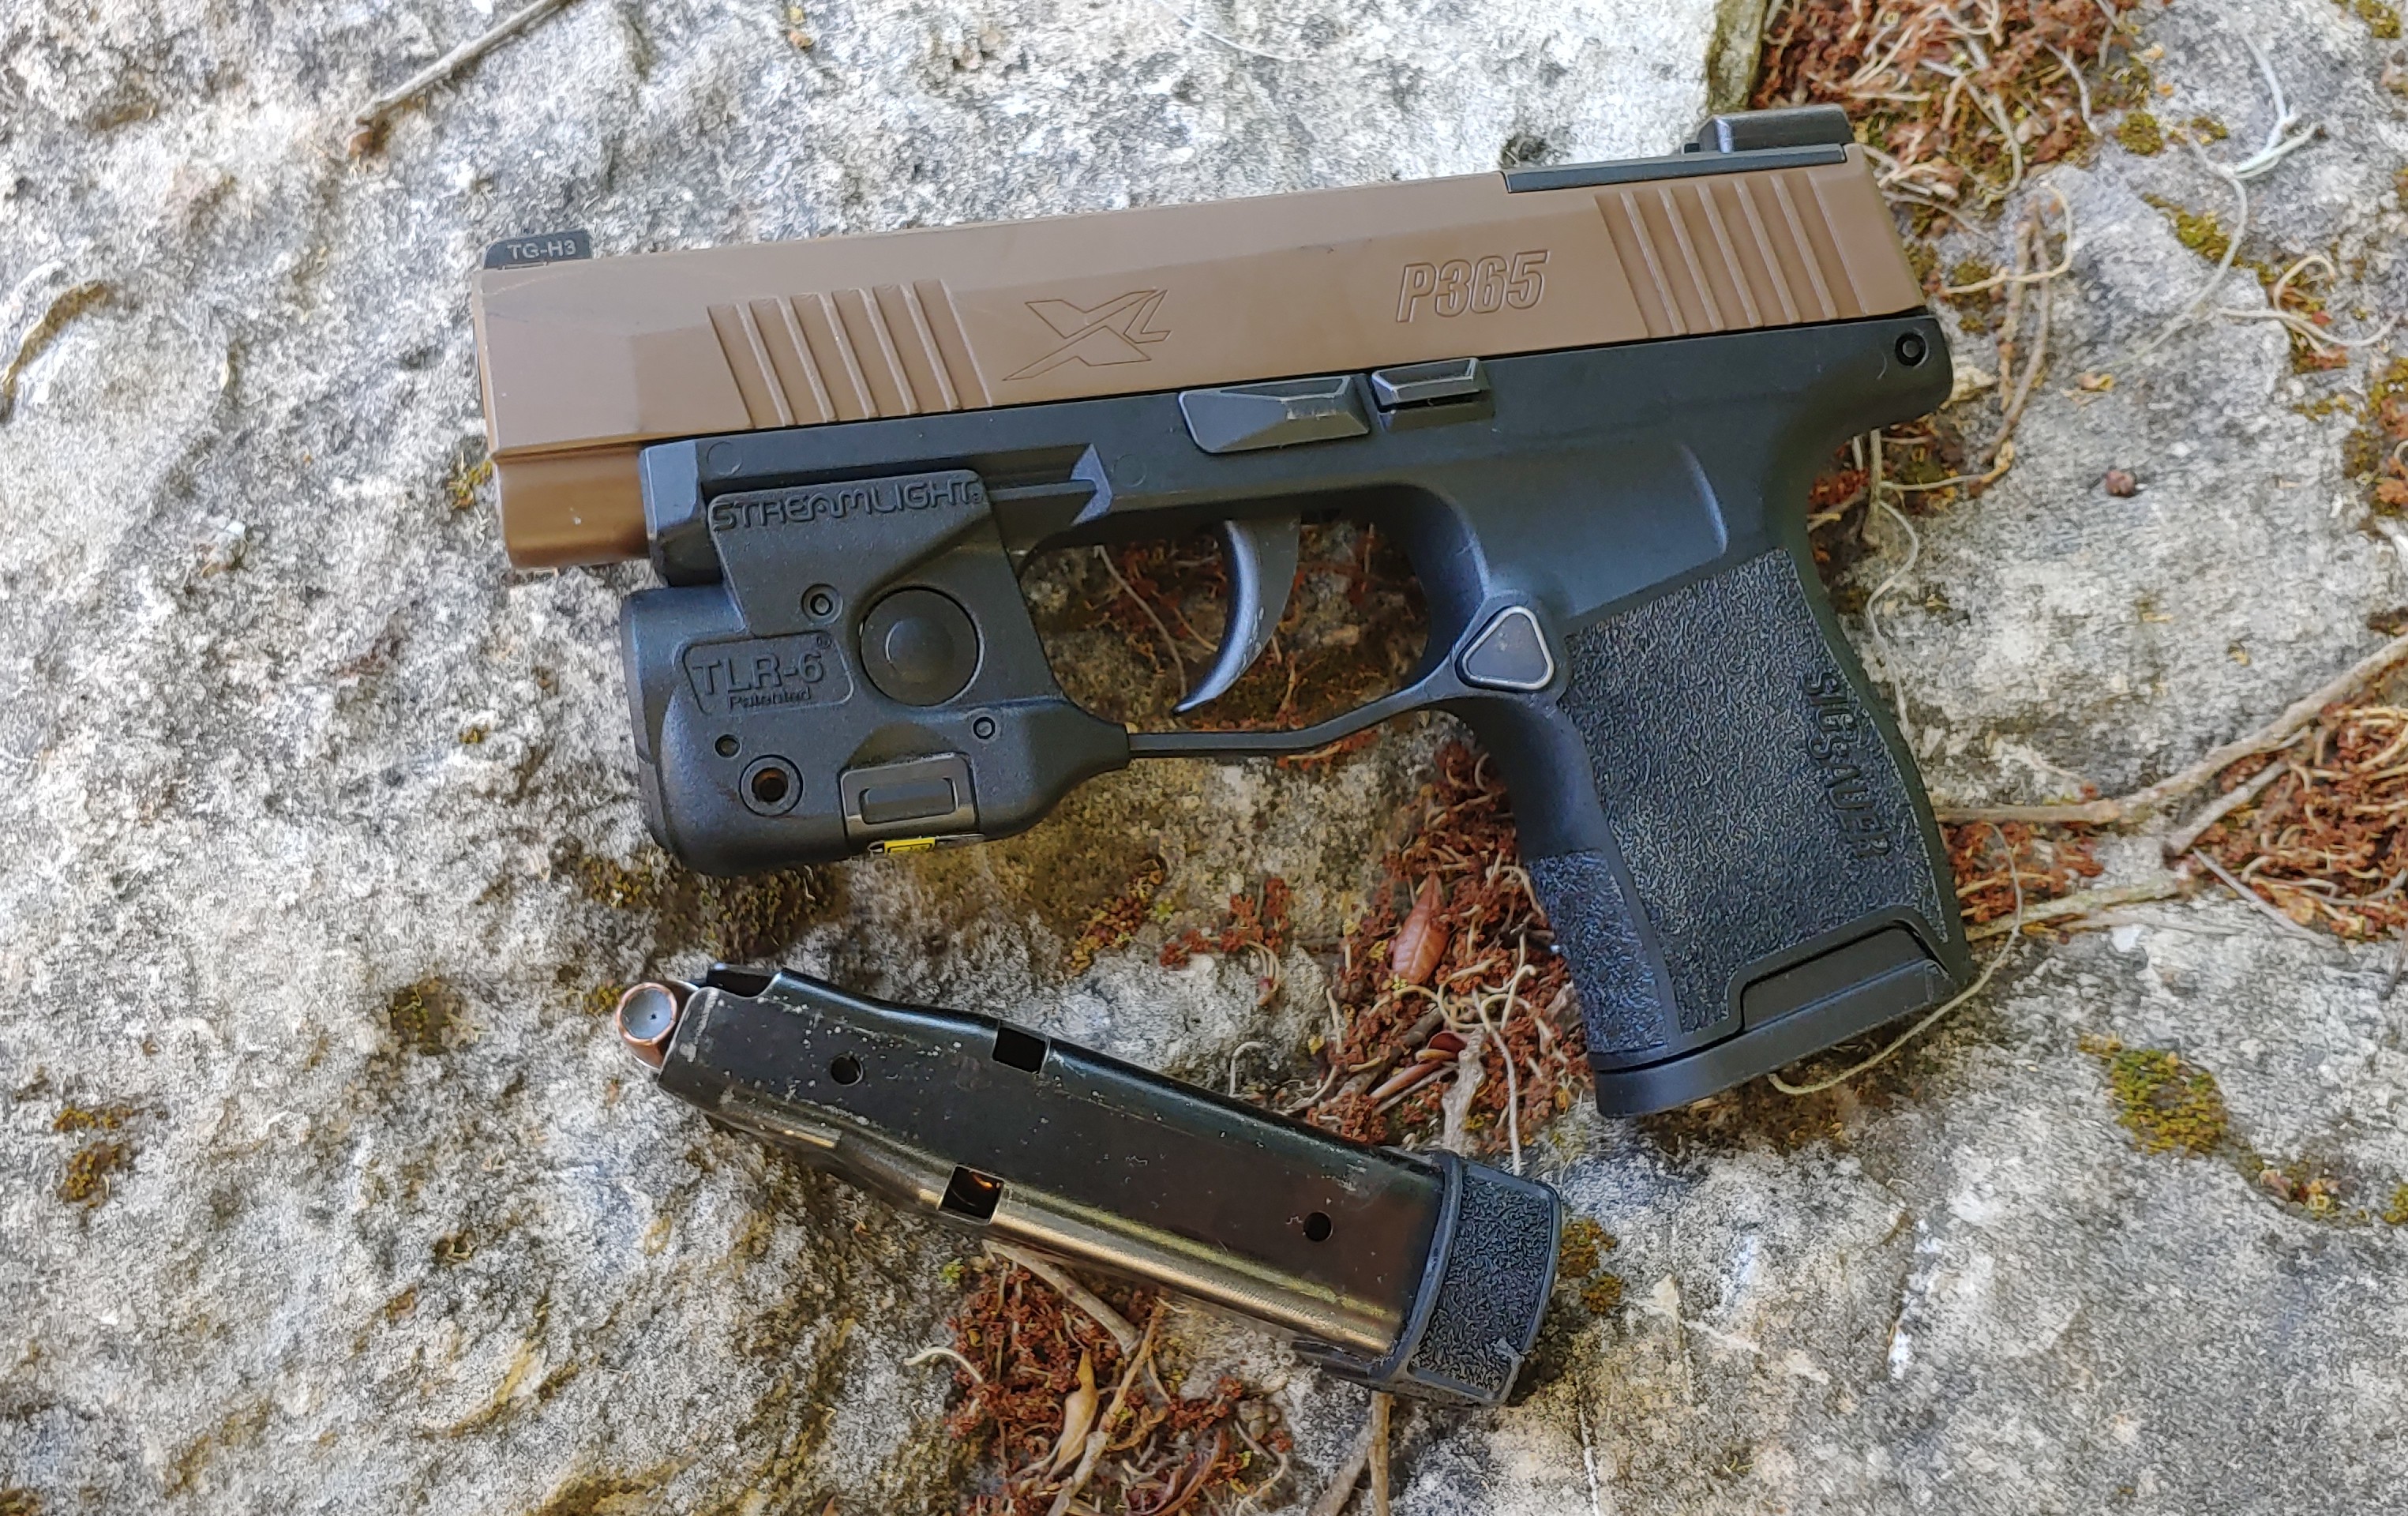 Sig Sauer, Sig P365, P395, SIG P365, firearms, concealed carry, P365 XL, P365 Hybrid, hybrid holsters, CrossBreed Holsters, CCP, SIG Pistols, Travis Pike, SIG, sig sauer p365 xl, IWB, OWB, 